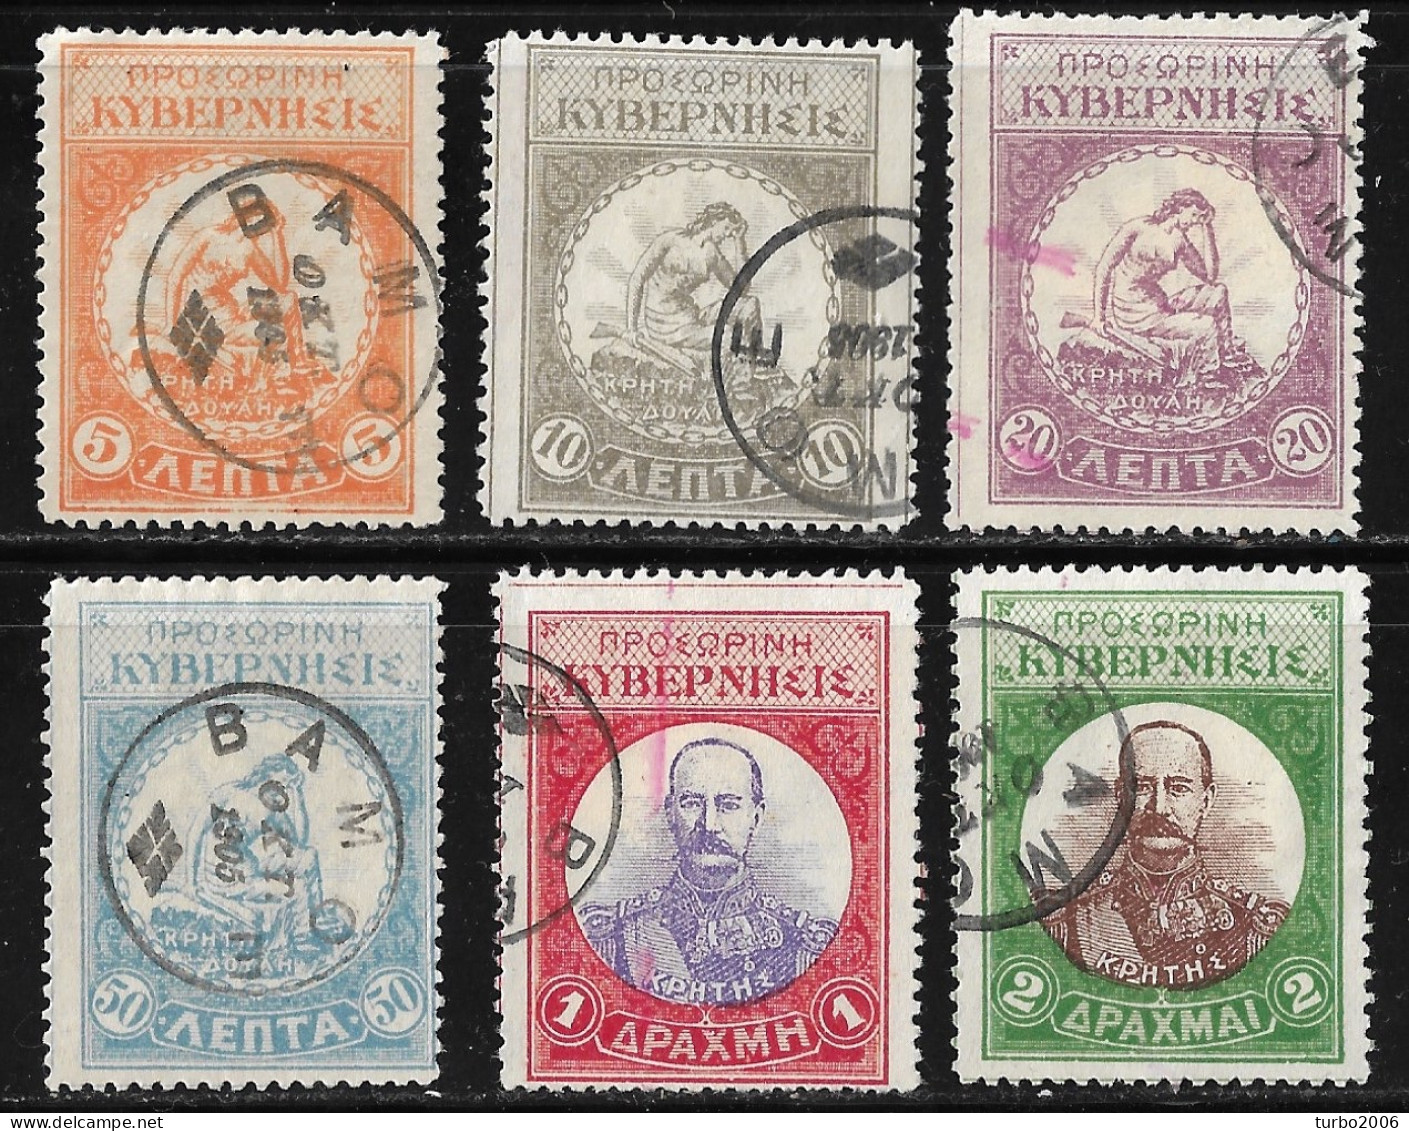 CRETE 1905 3rd Issue Of The Therrison Rebels Vl. 42 / 47 Complete Used Set - Crète